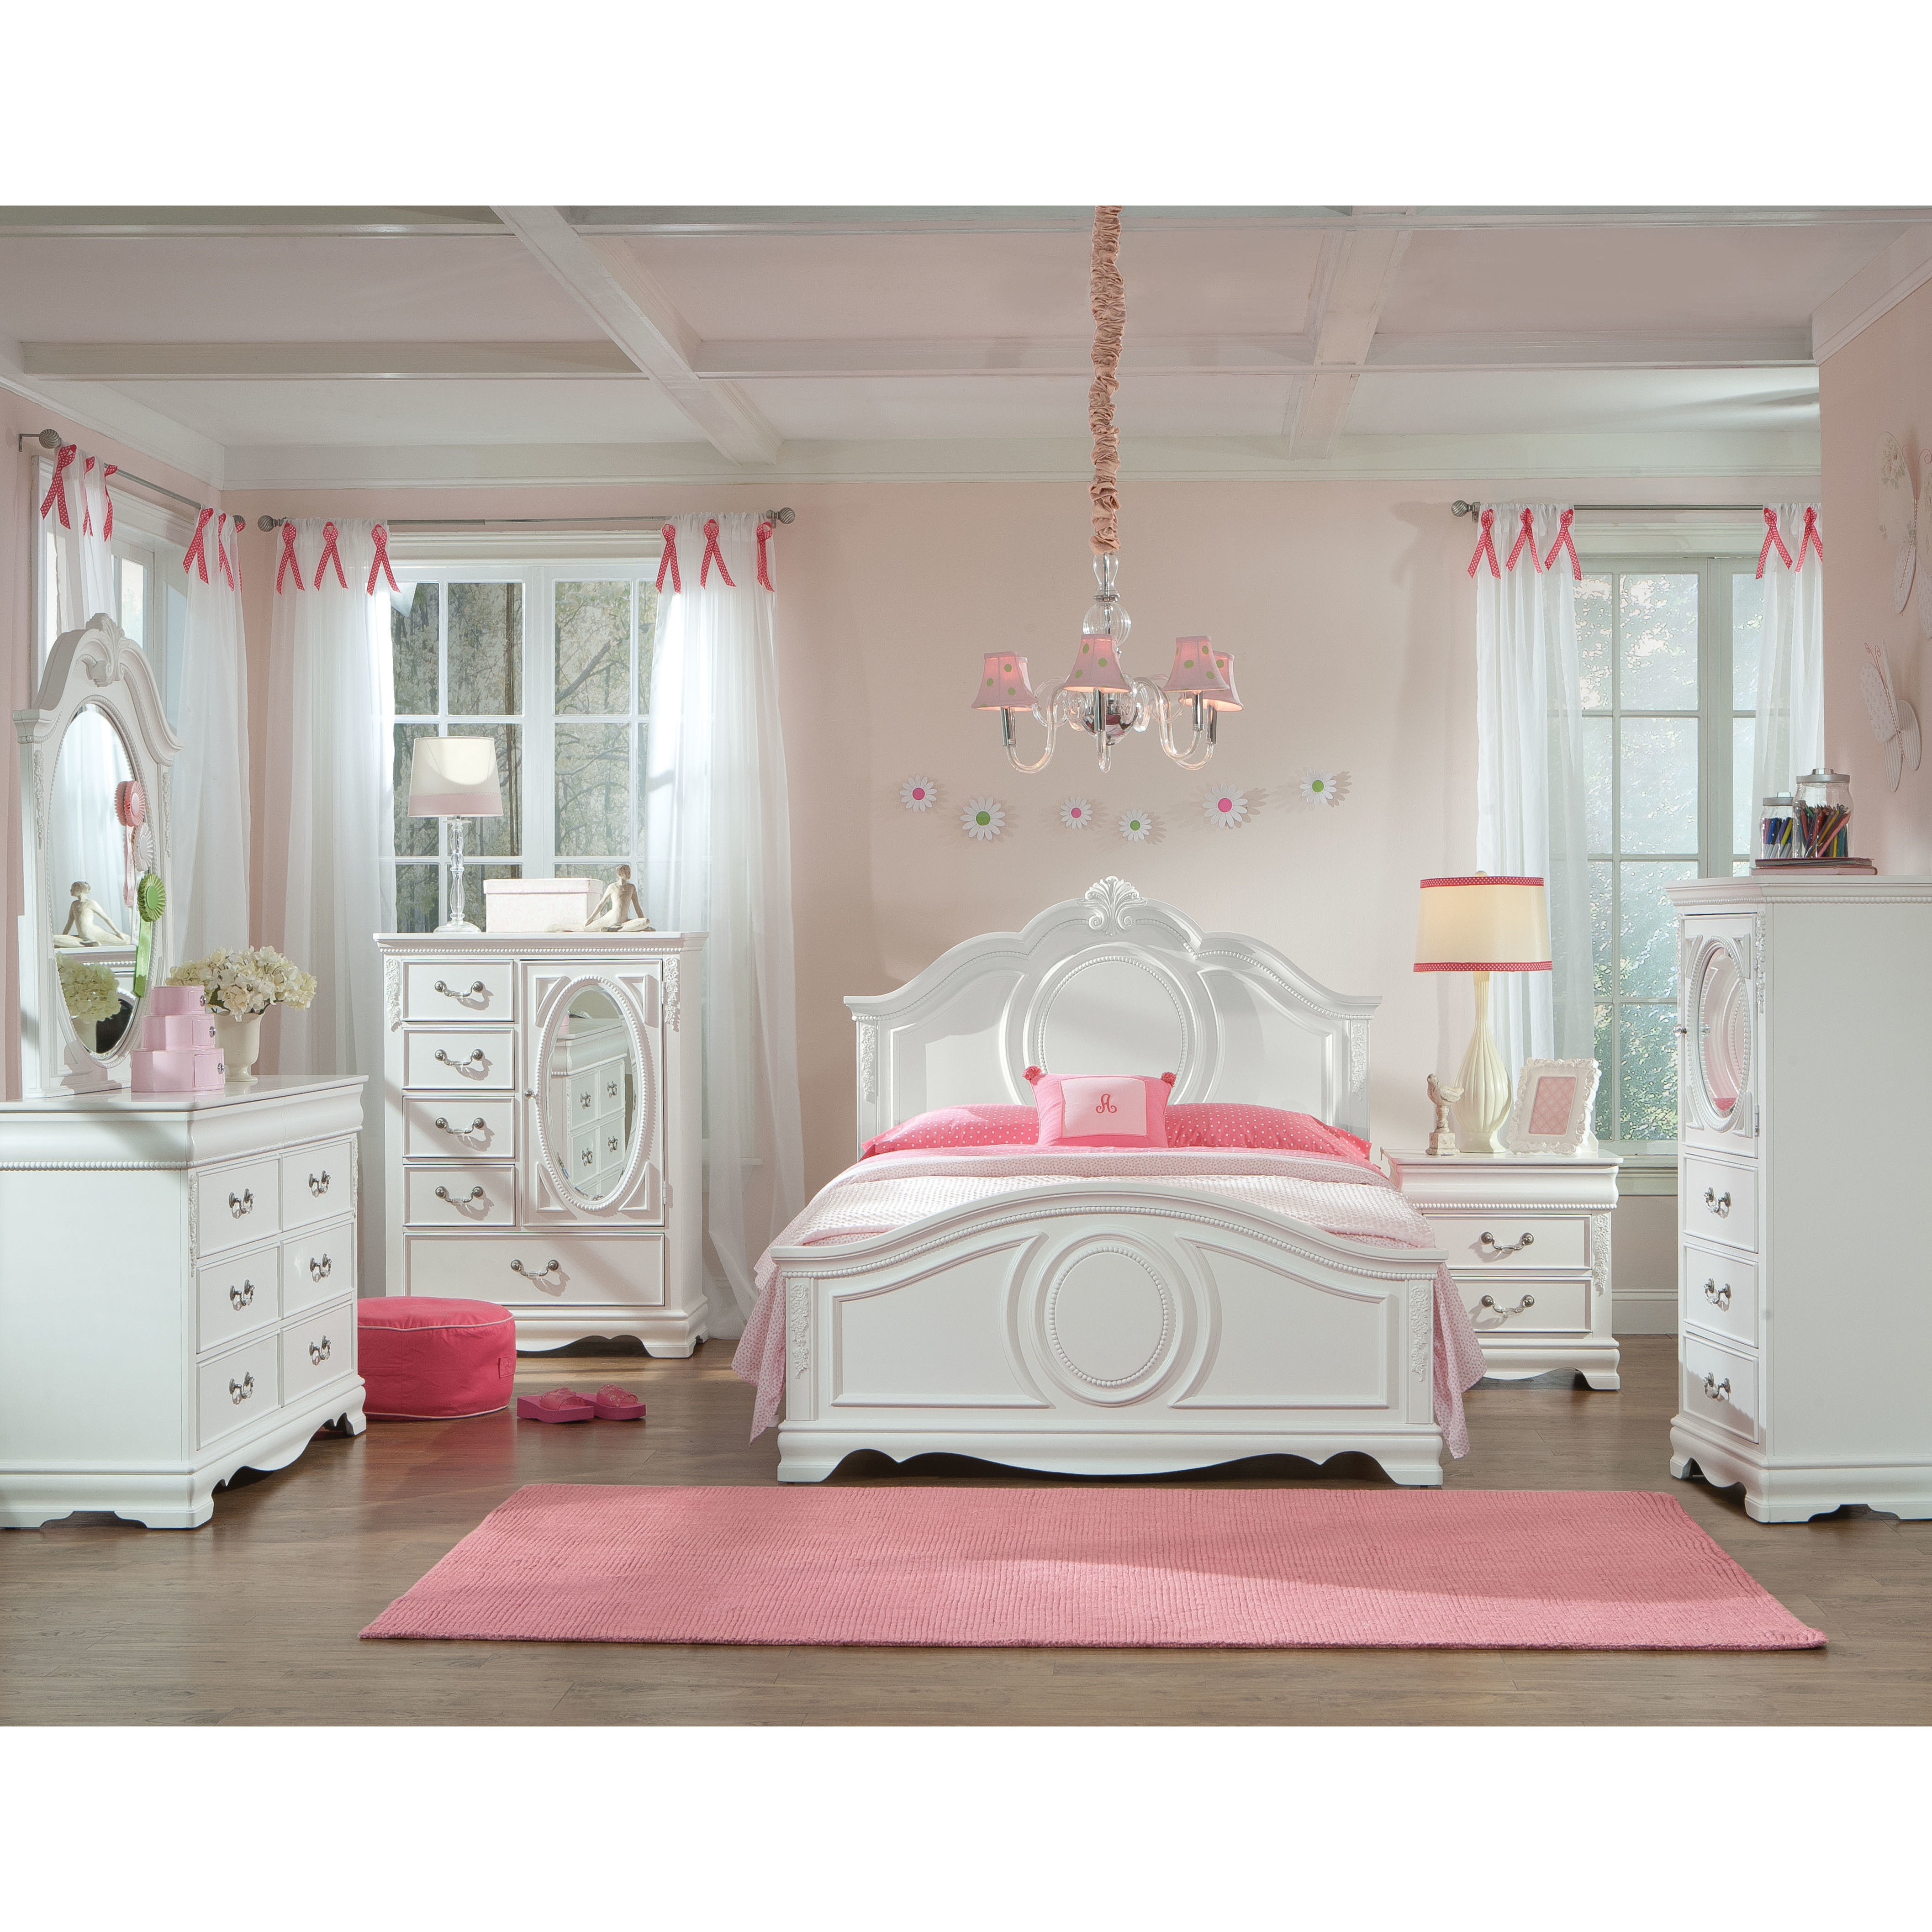 Exciting Girl White Bedroom Furniture For Trendy Sets King Wooden with dimensions 4230 X 4230